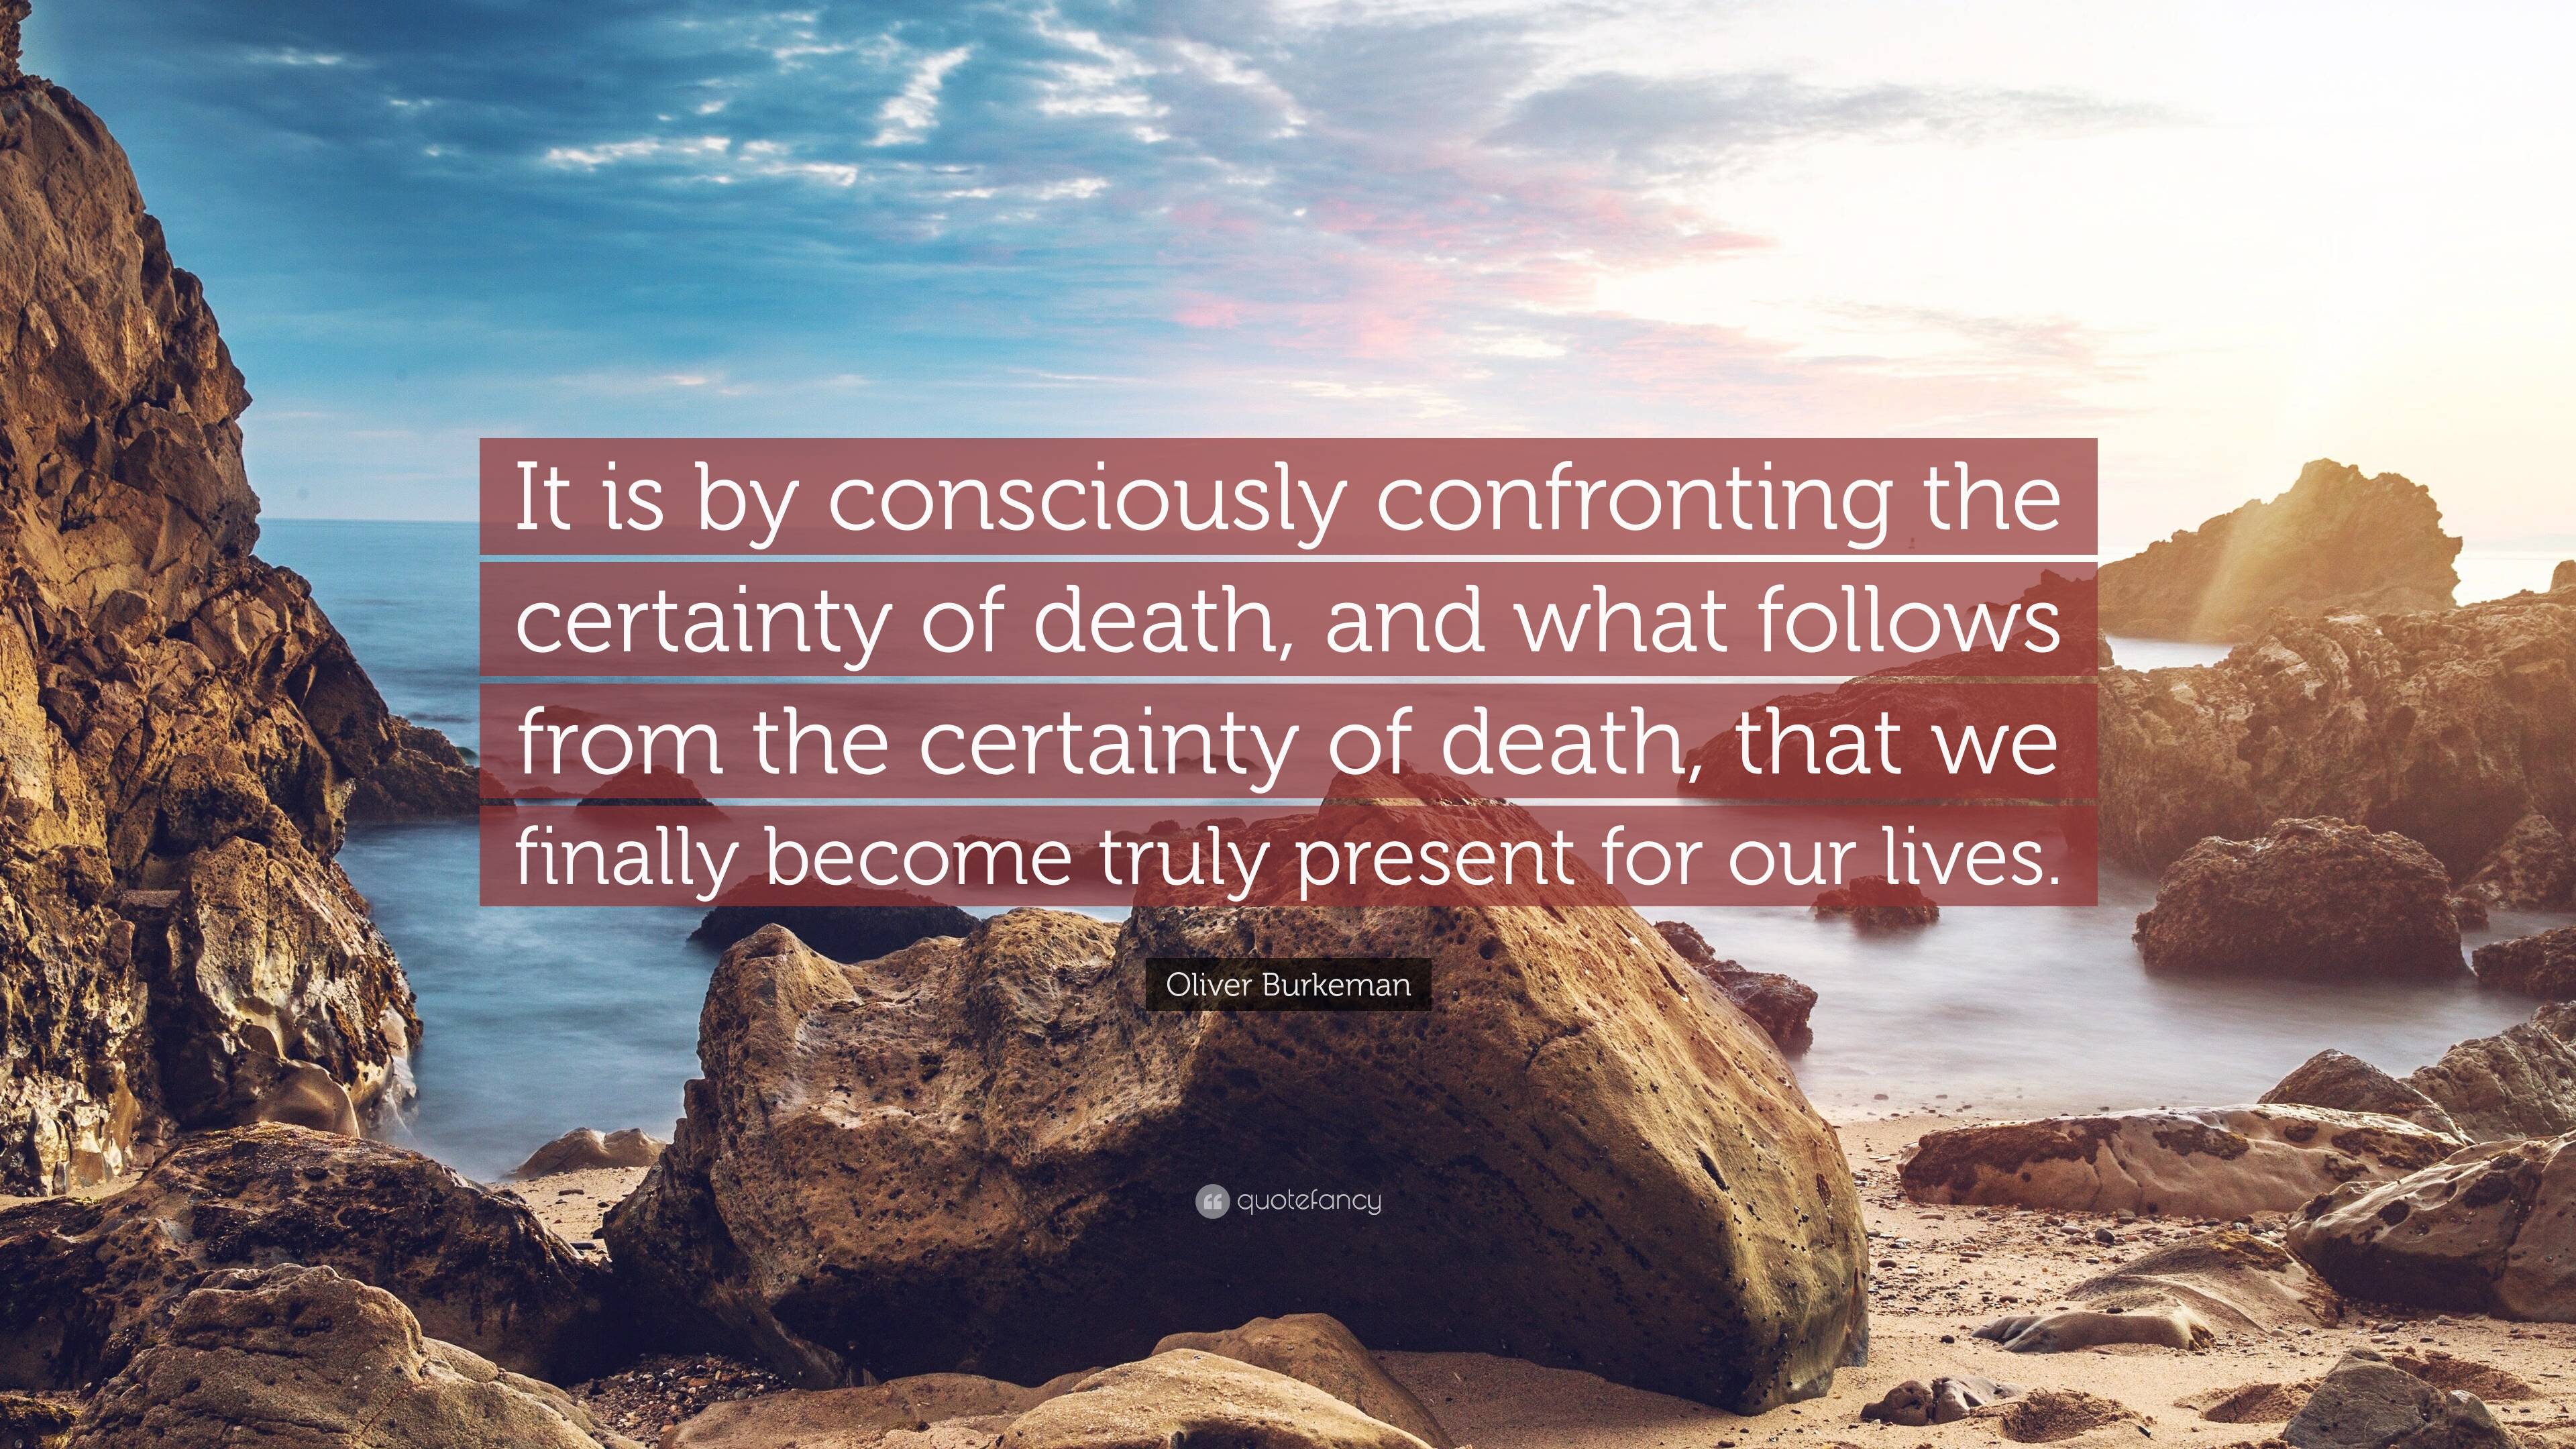 Oliver Burkeman Quote: “It is by consciously confronting the certainty ...